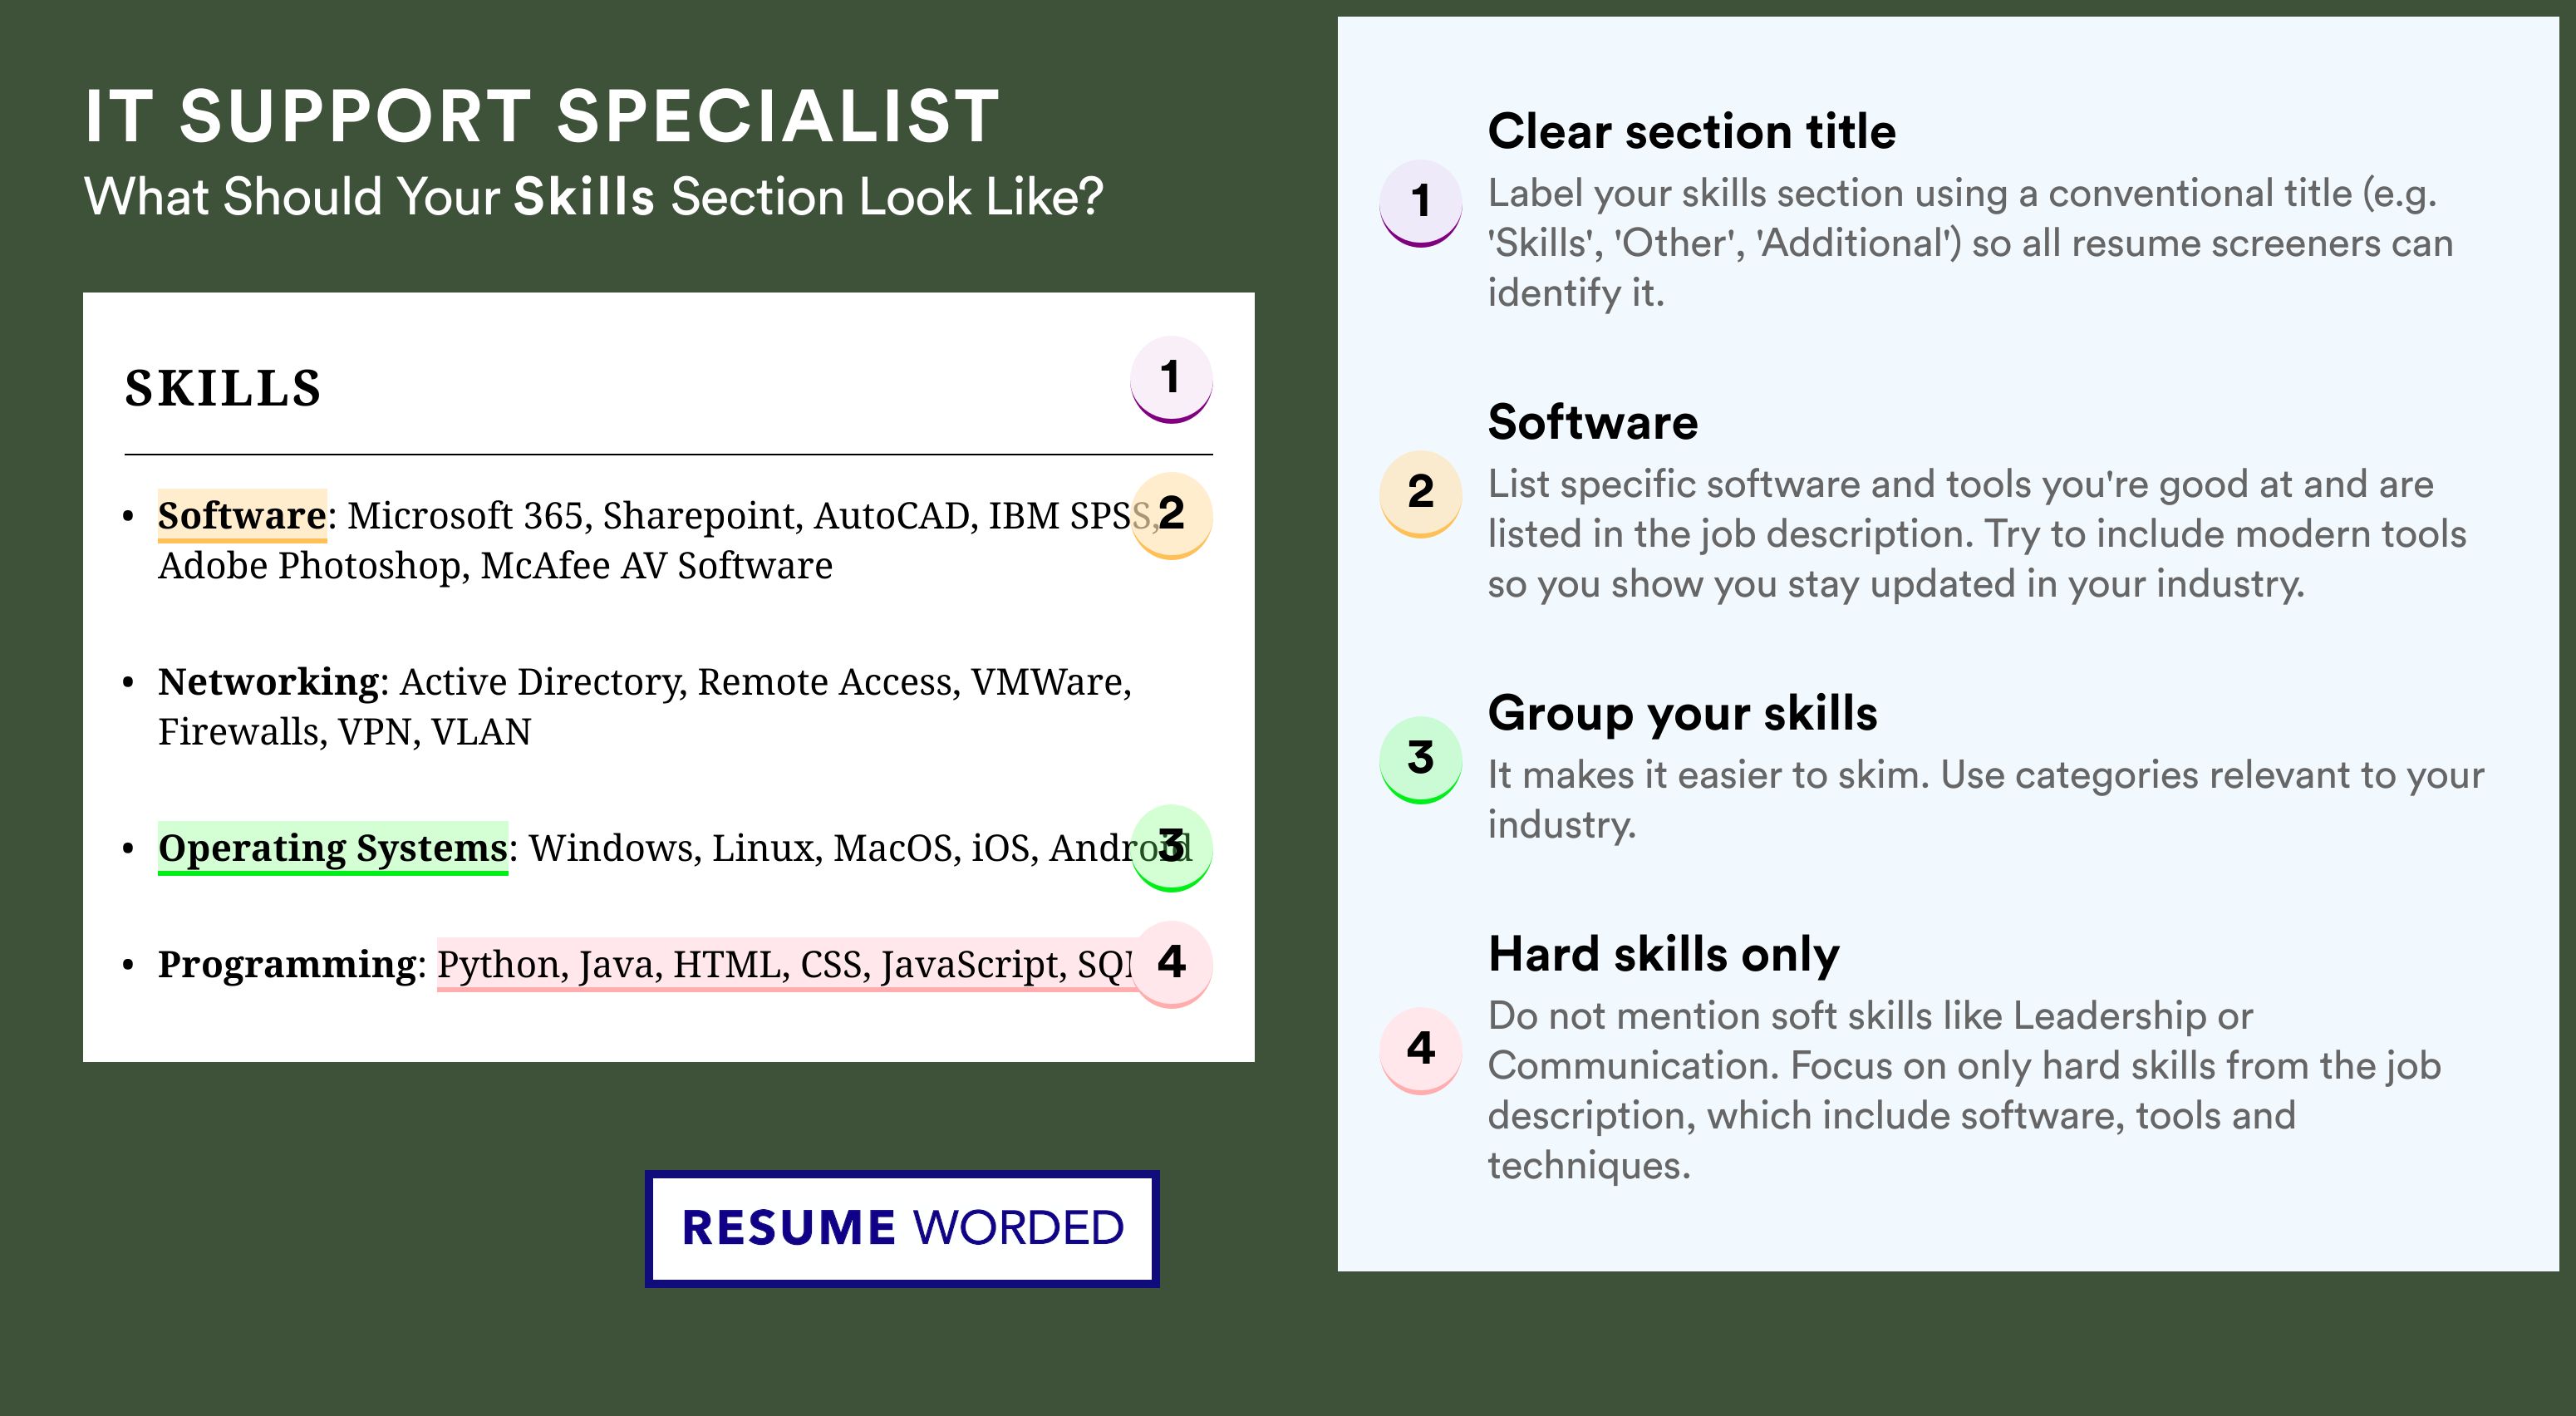 How To Write Your Skills Section - IT Support Specialist Roles